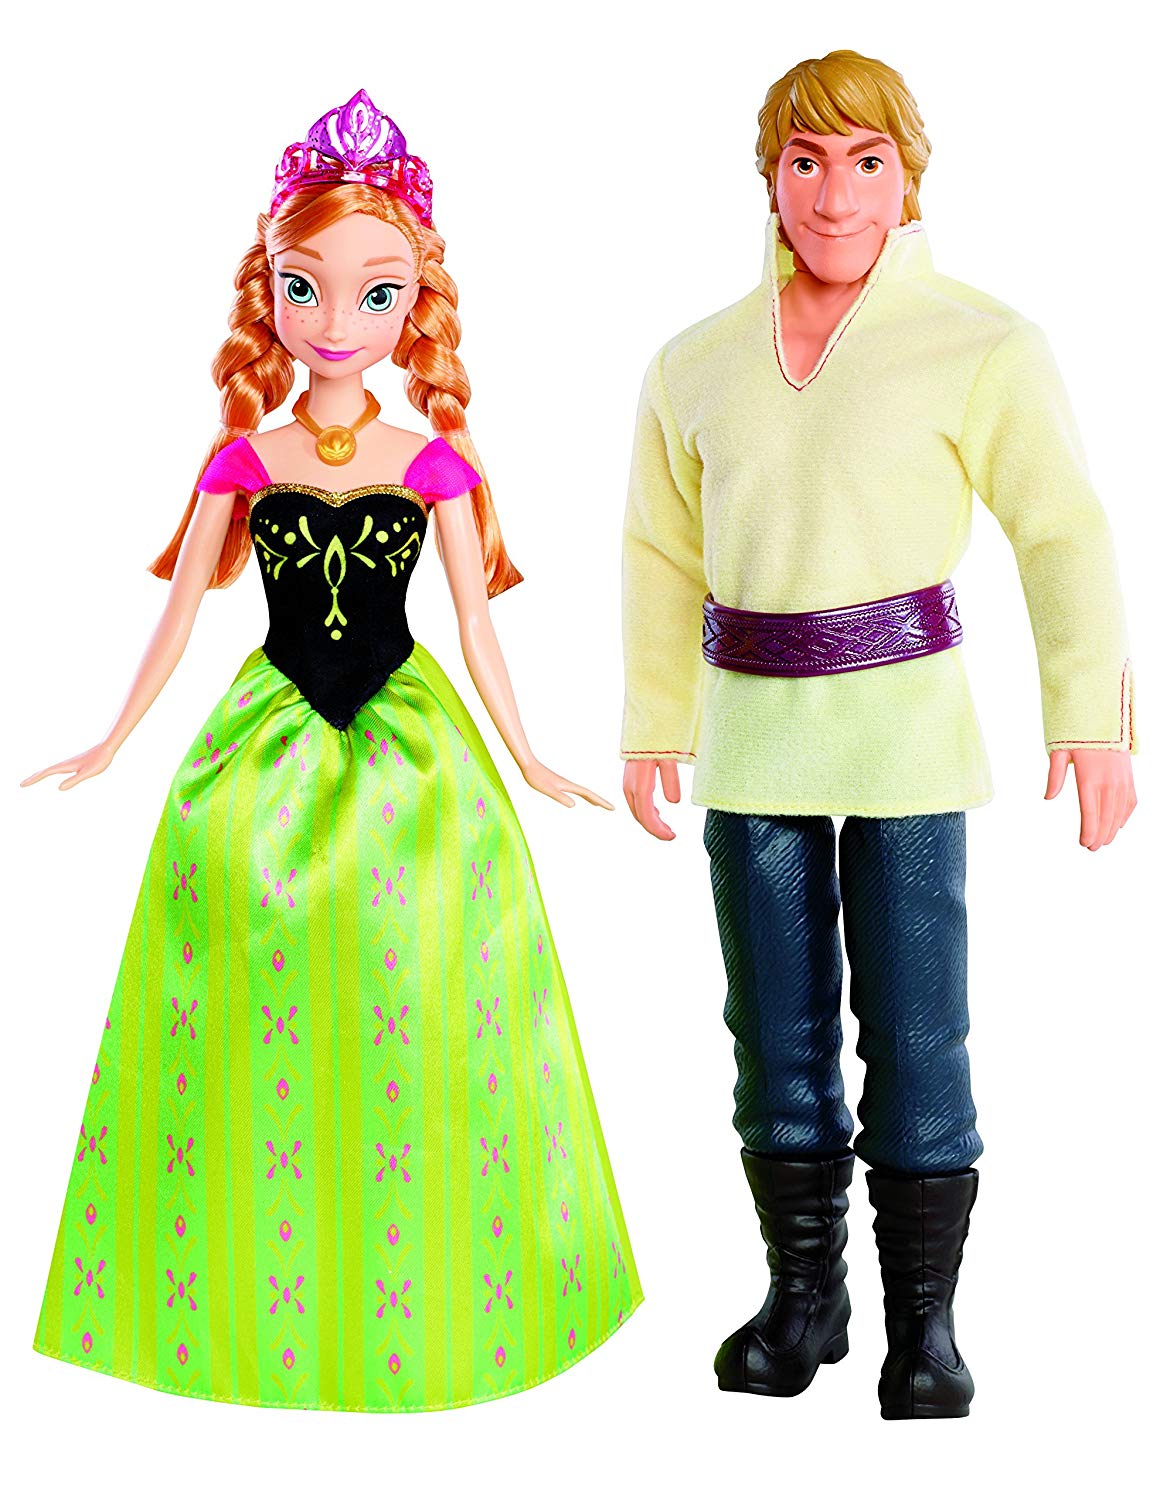 disney frozen anna and kristoff doll, 2-pack - image 1 of 2